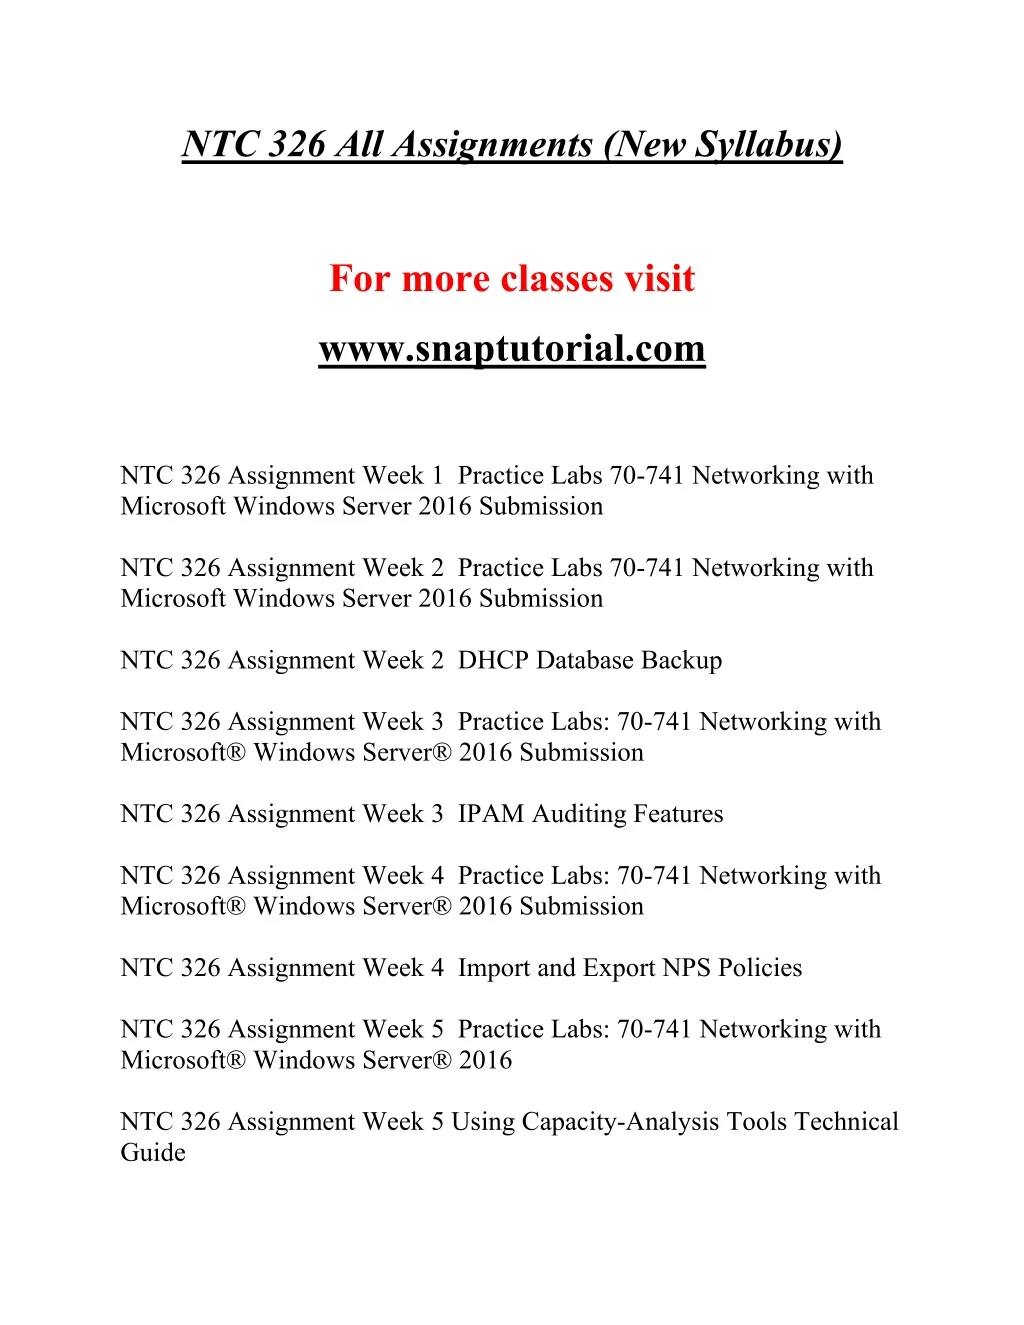 ntc 326 all assignments new syllabus